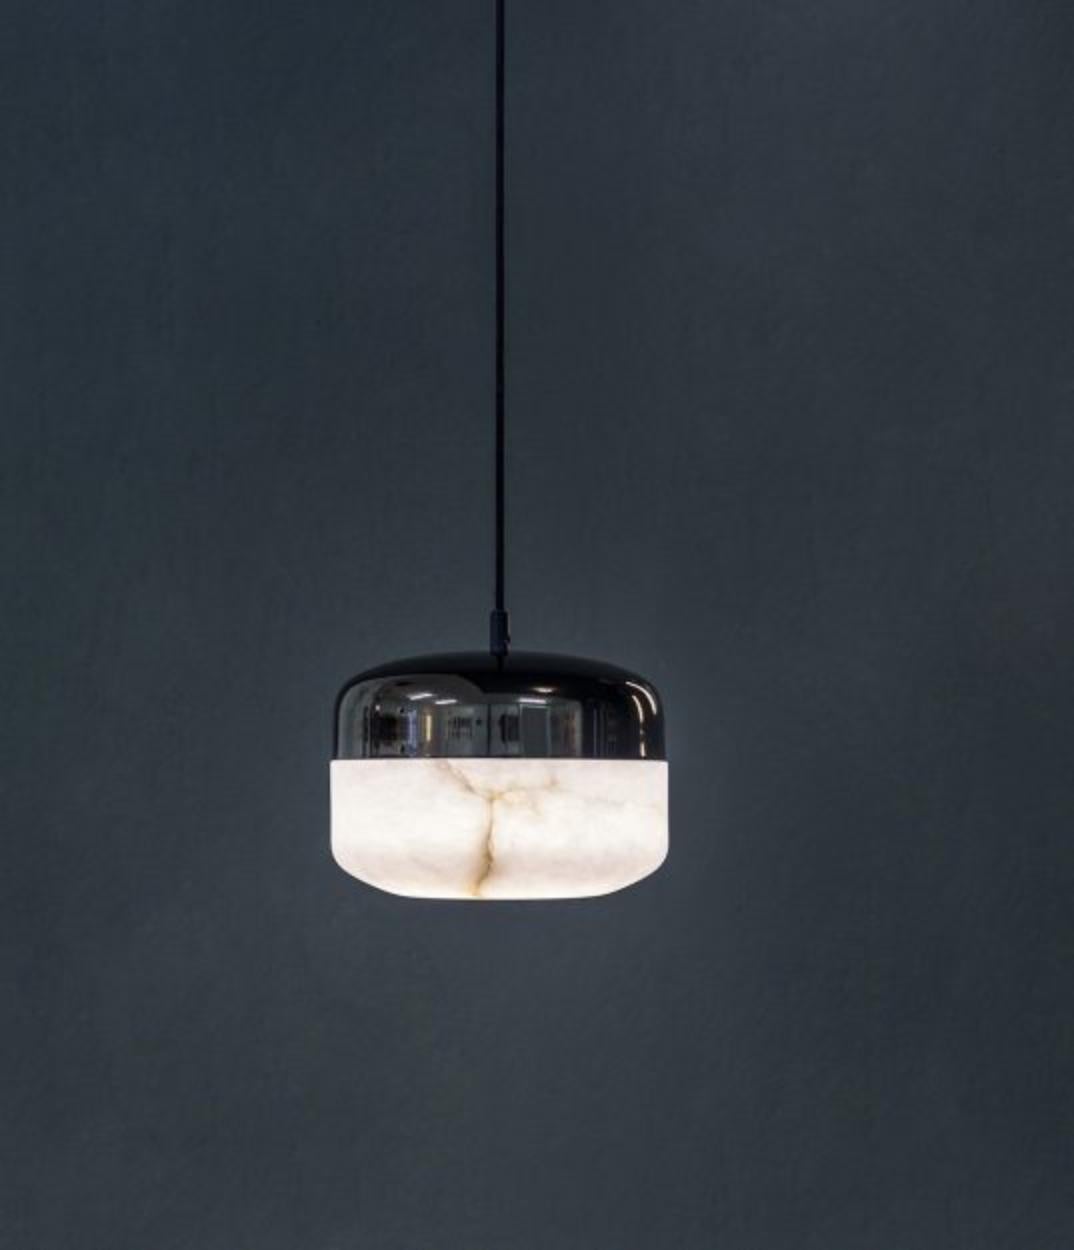 Copper Small Pendant Lamp by United Alabaster
Dimensions: D 18 x H 200 cm
Materials: Alabaster, Copper (Black Nickel Finish)
Also Available in Satin Copper, Satin Gold finishes.Please contact us.

The Copper collection was born from the combination